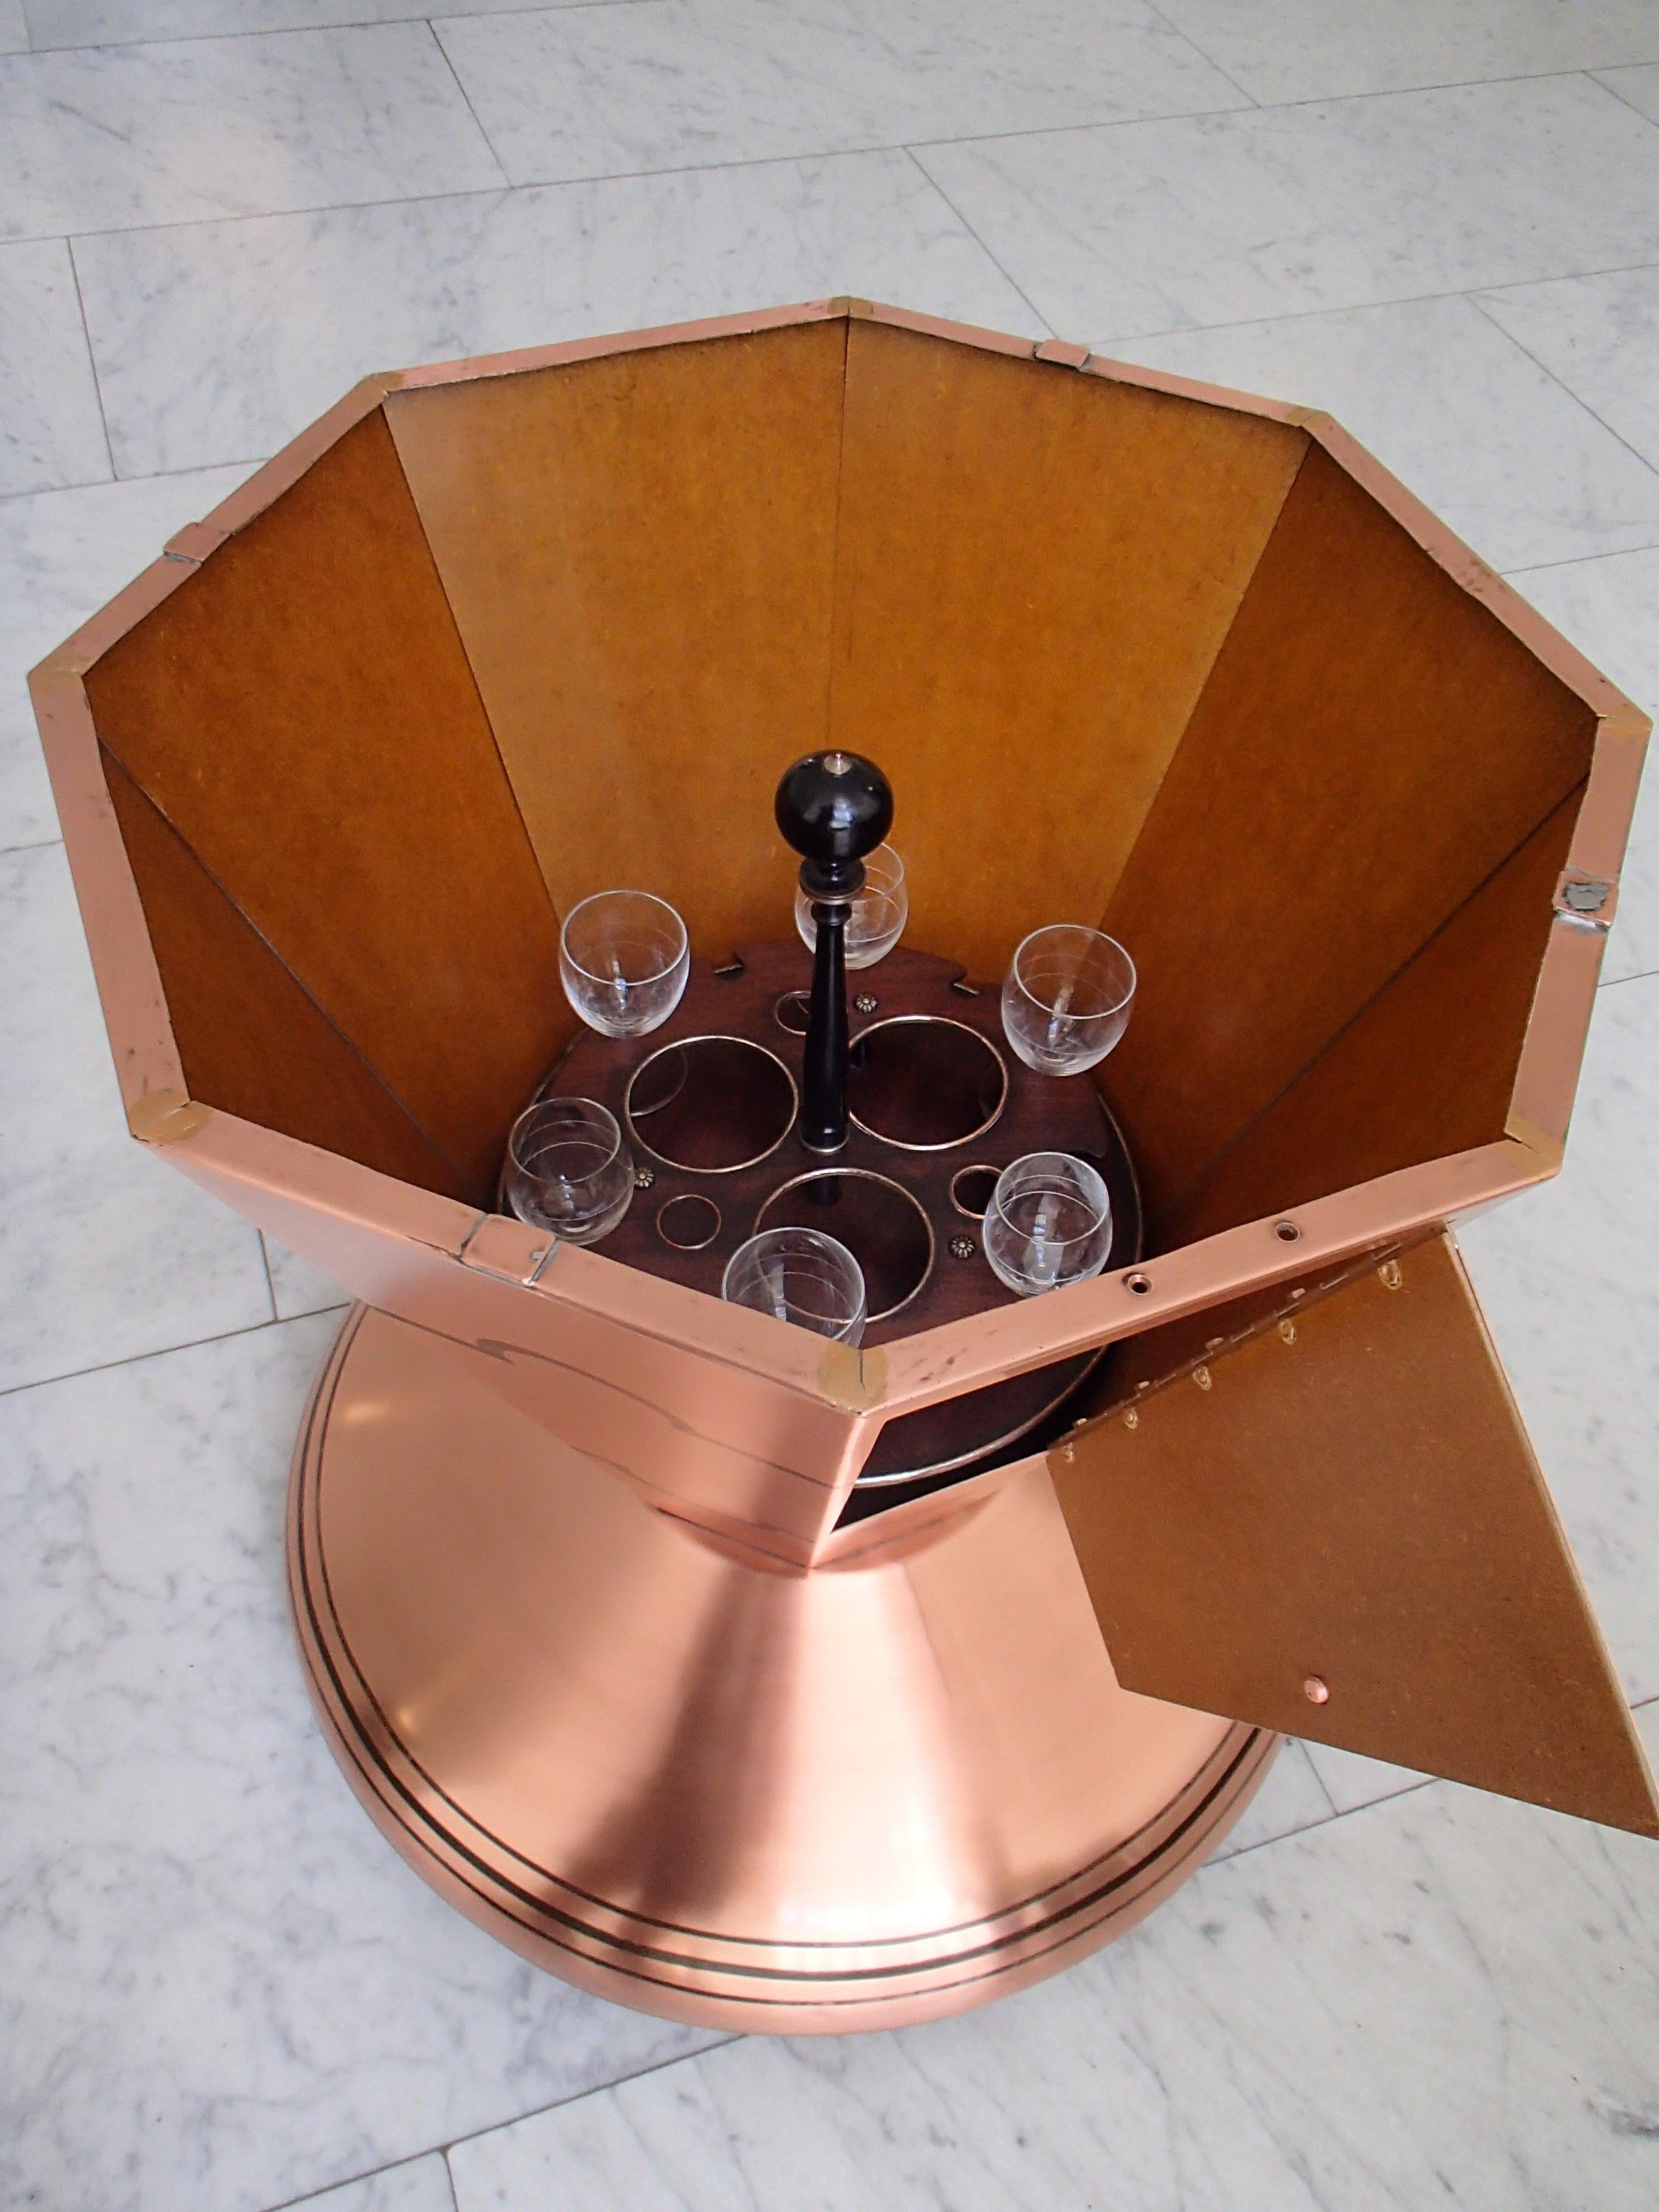 Art Deco Copper Bar Table on Wheels with Turnable Tray Inside and Glass Top For Sale 2